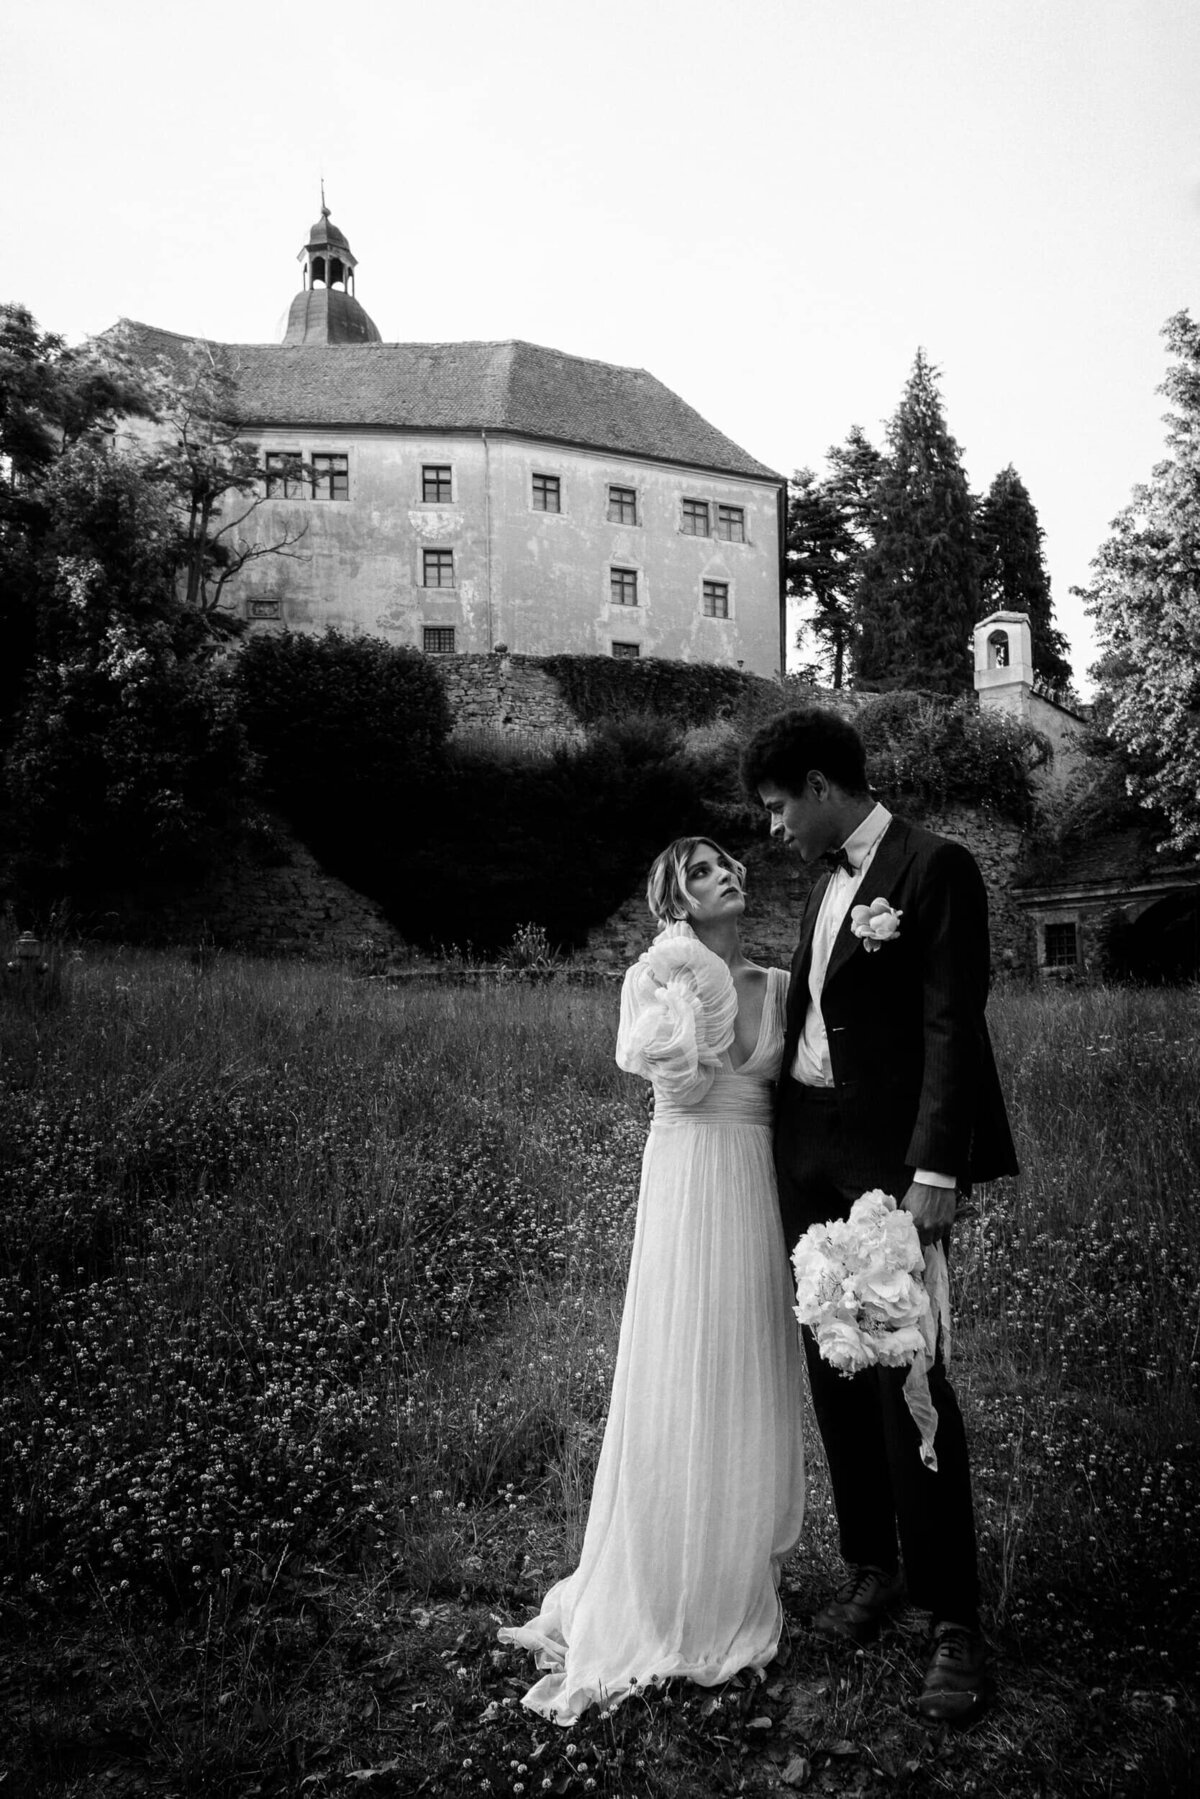 Destination Wedding in Germany wedding inspiration "Poetry of clouds" at Schloss Virnsberg - by wedding photographer SELENE ADORES-014